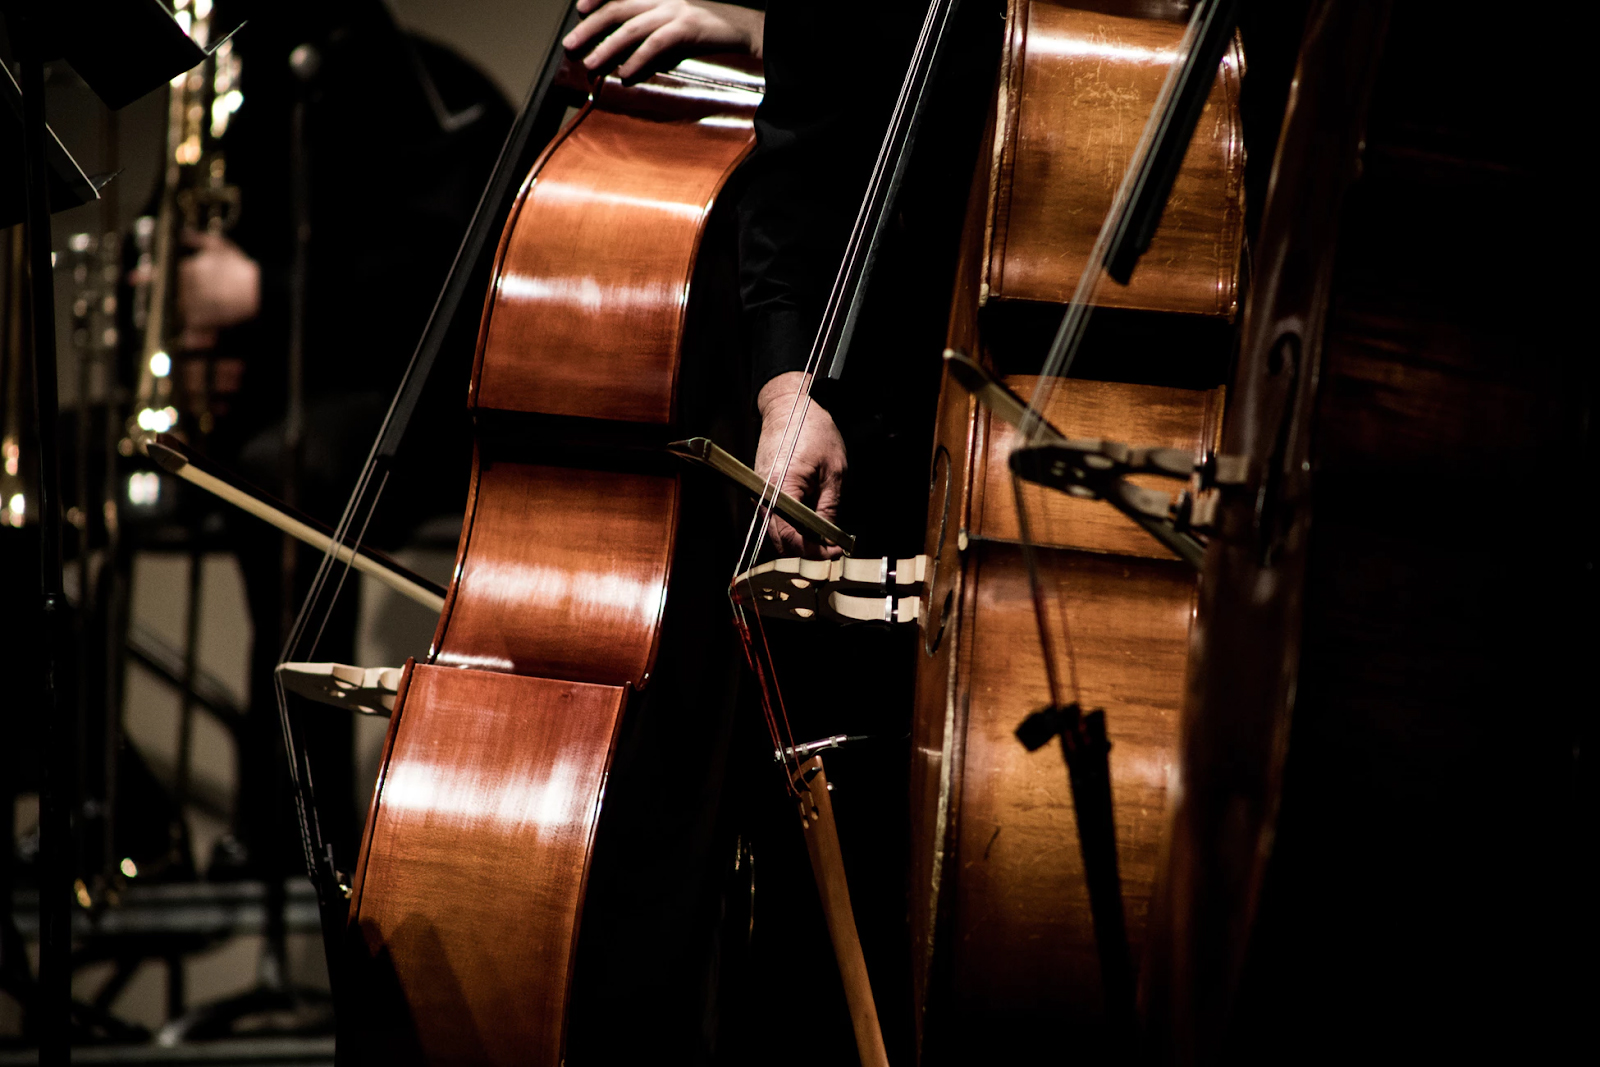 A close up photo of two doublebasses being played by Kael Bloom (from Unsplash)